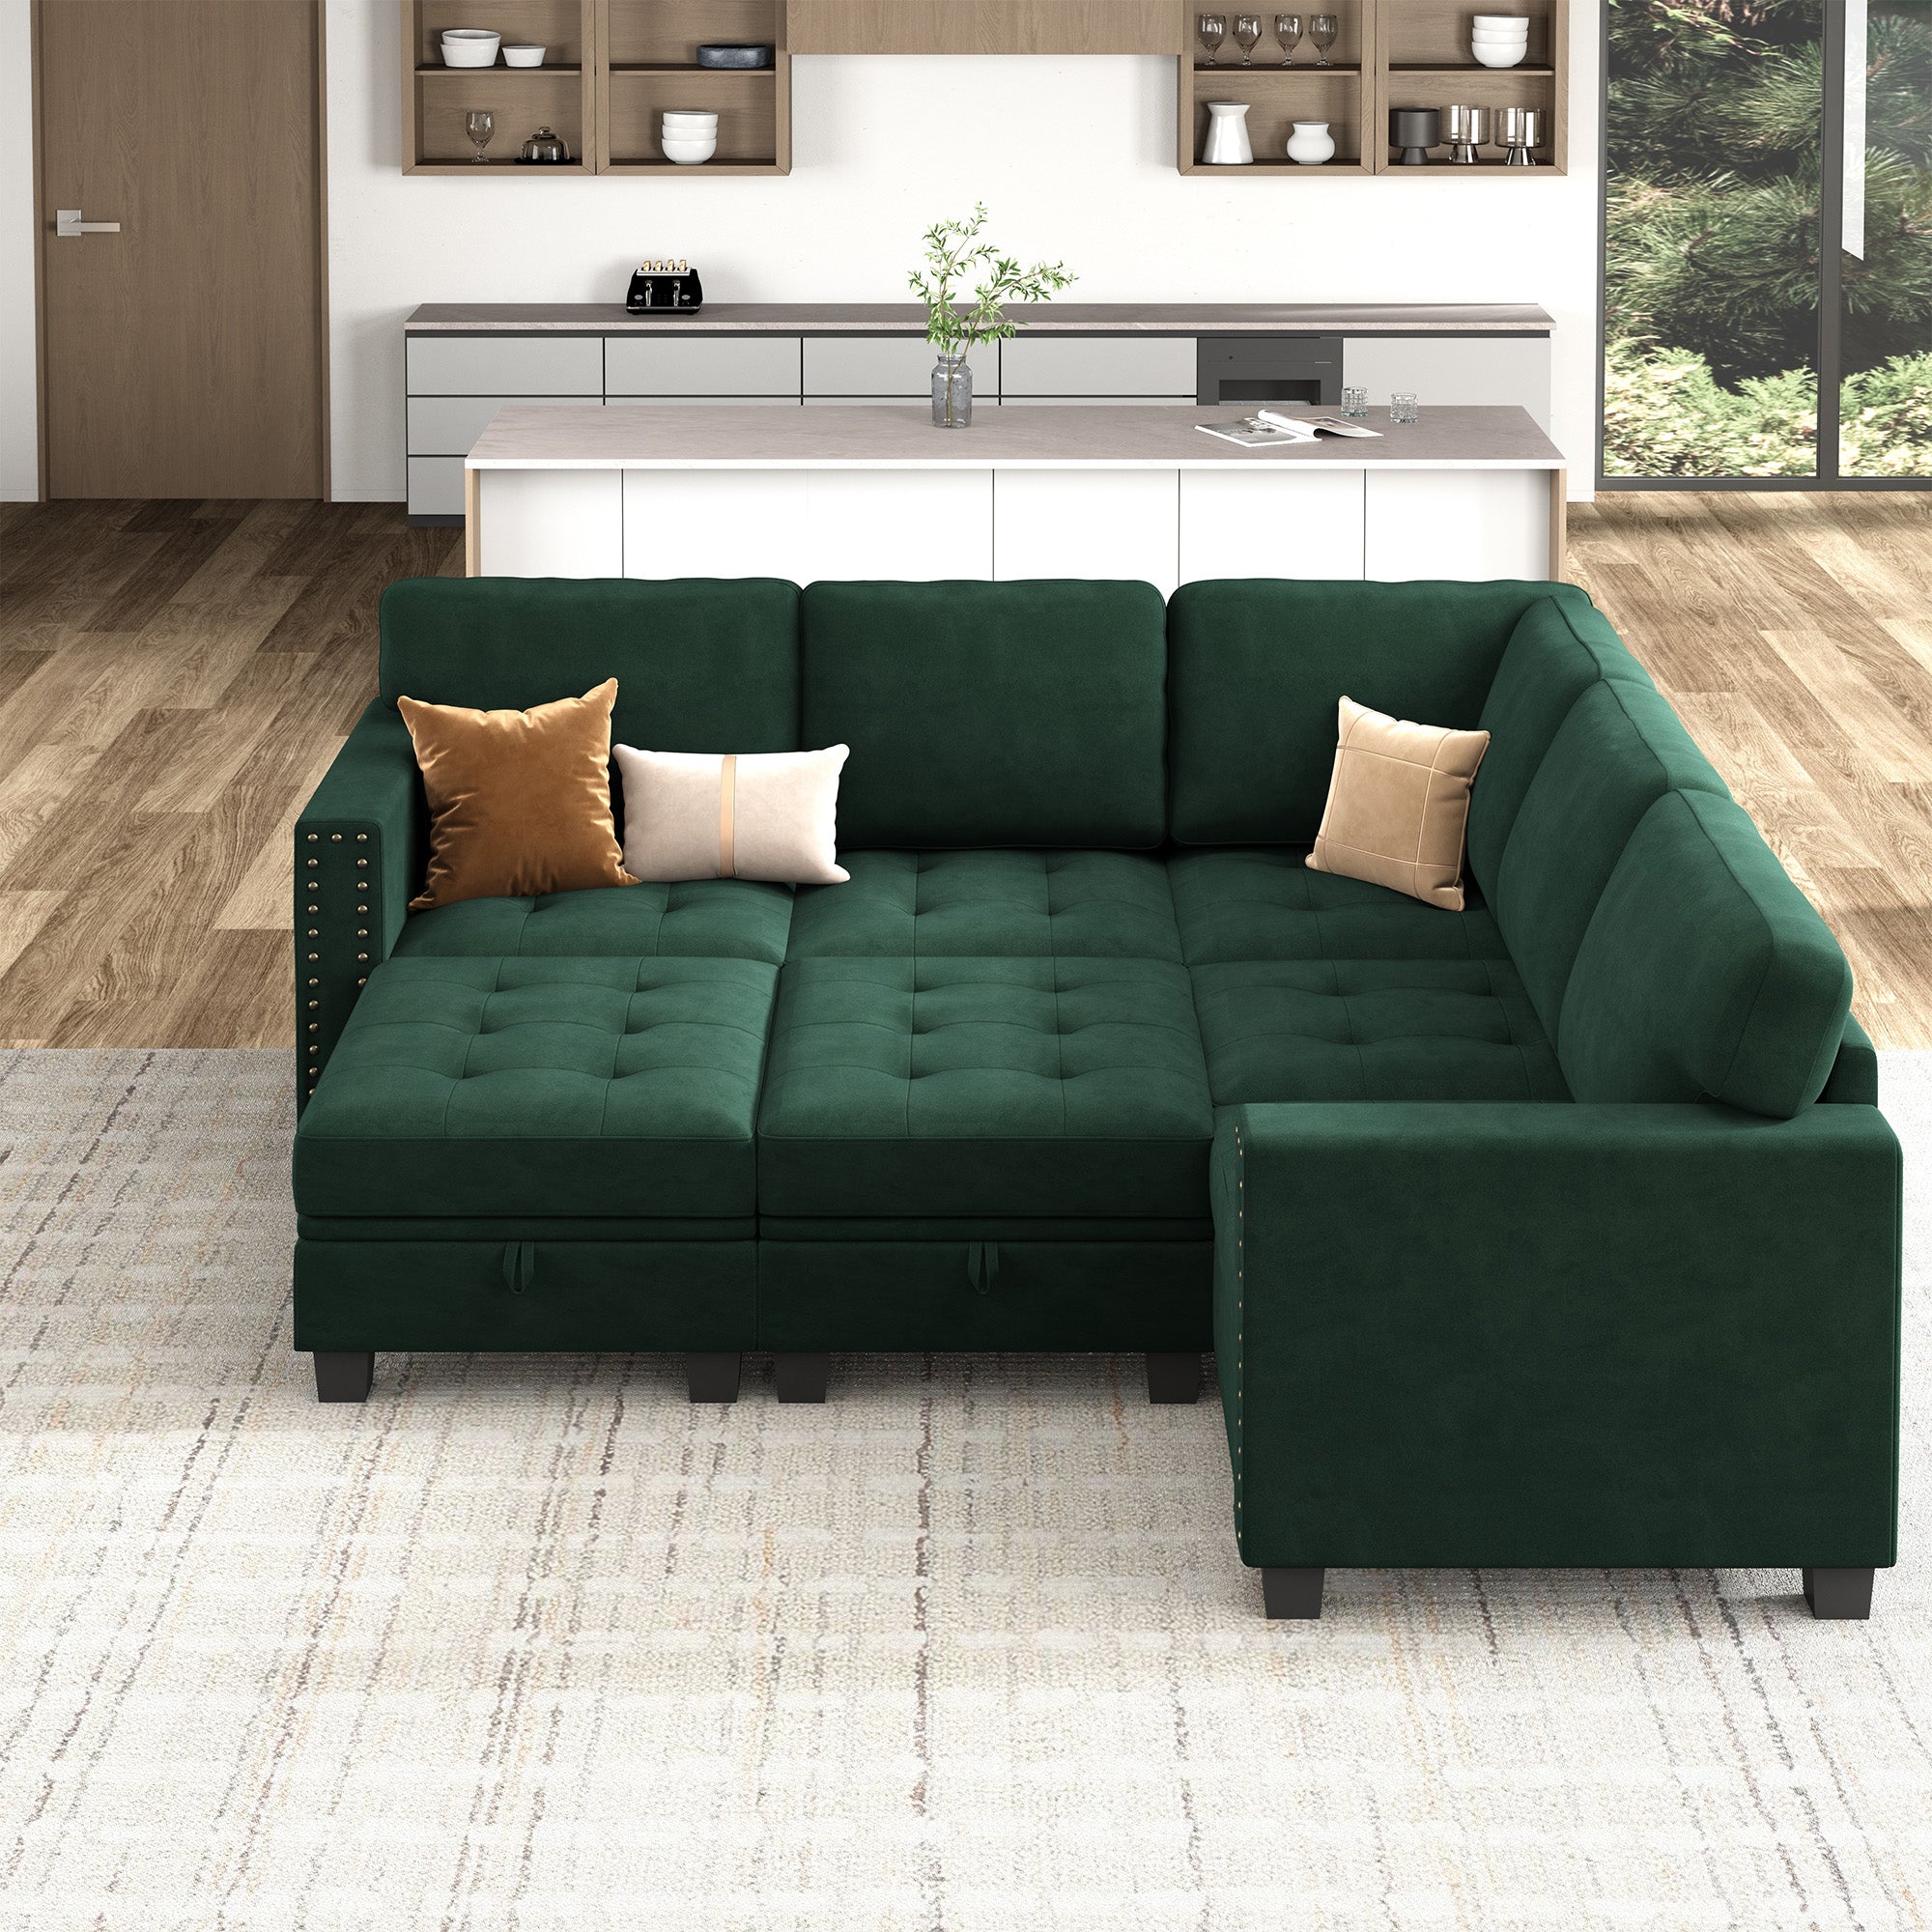 HONBAY Wraparound Modular Sofa 7-Seat With 2-Storage Space+1-Left Arm+1-Right Arm #Color_Green